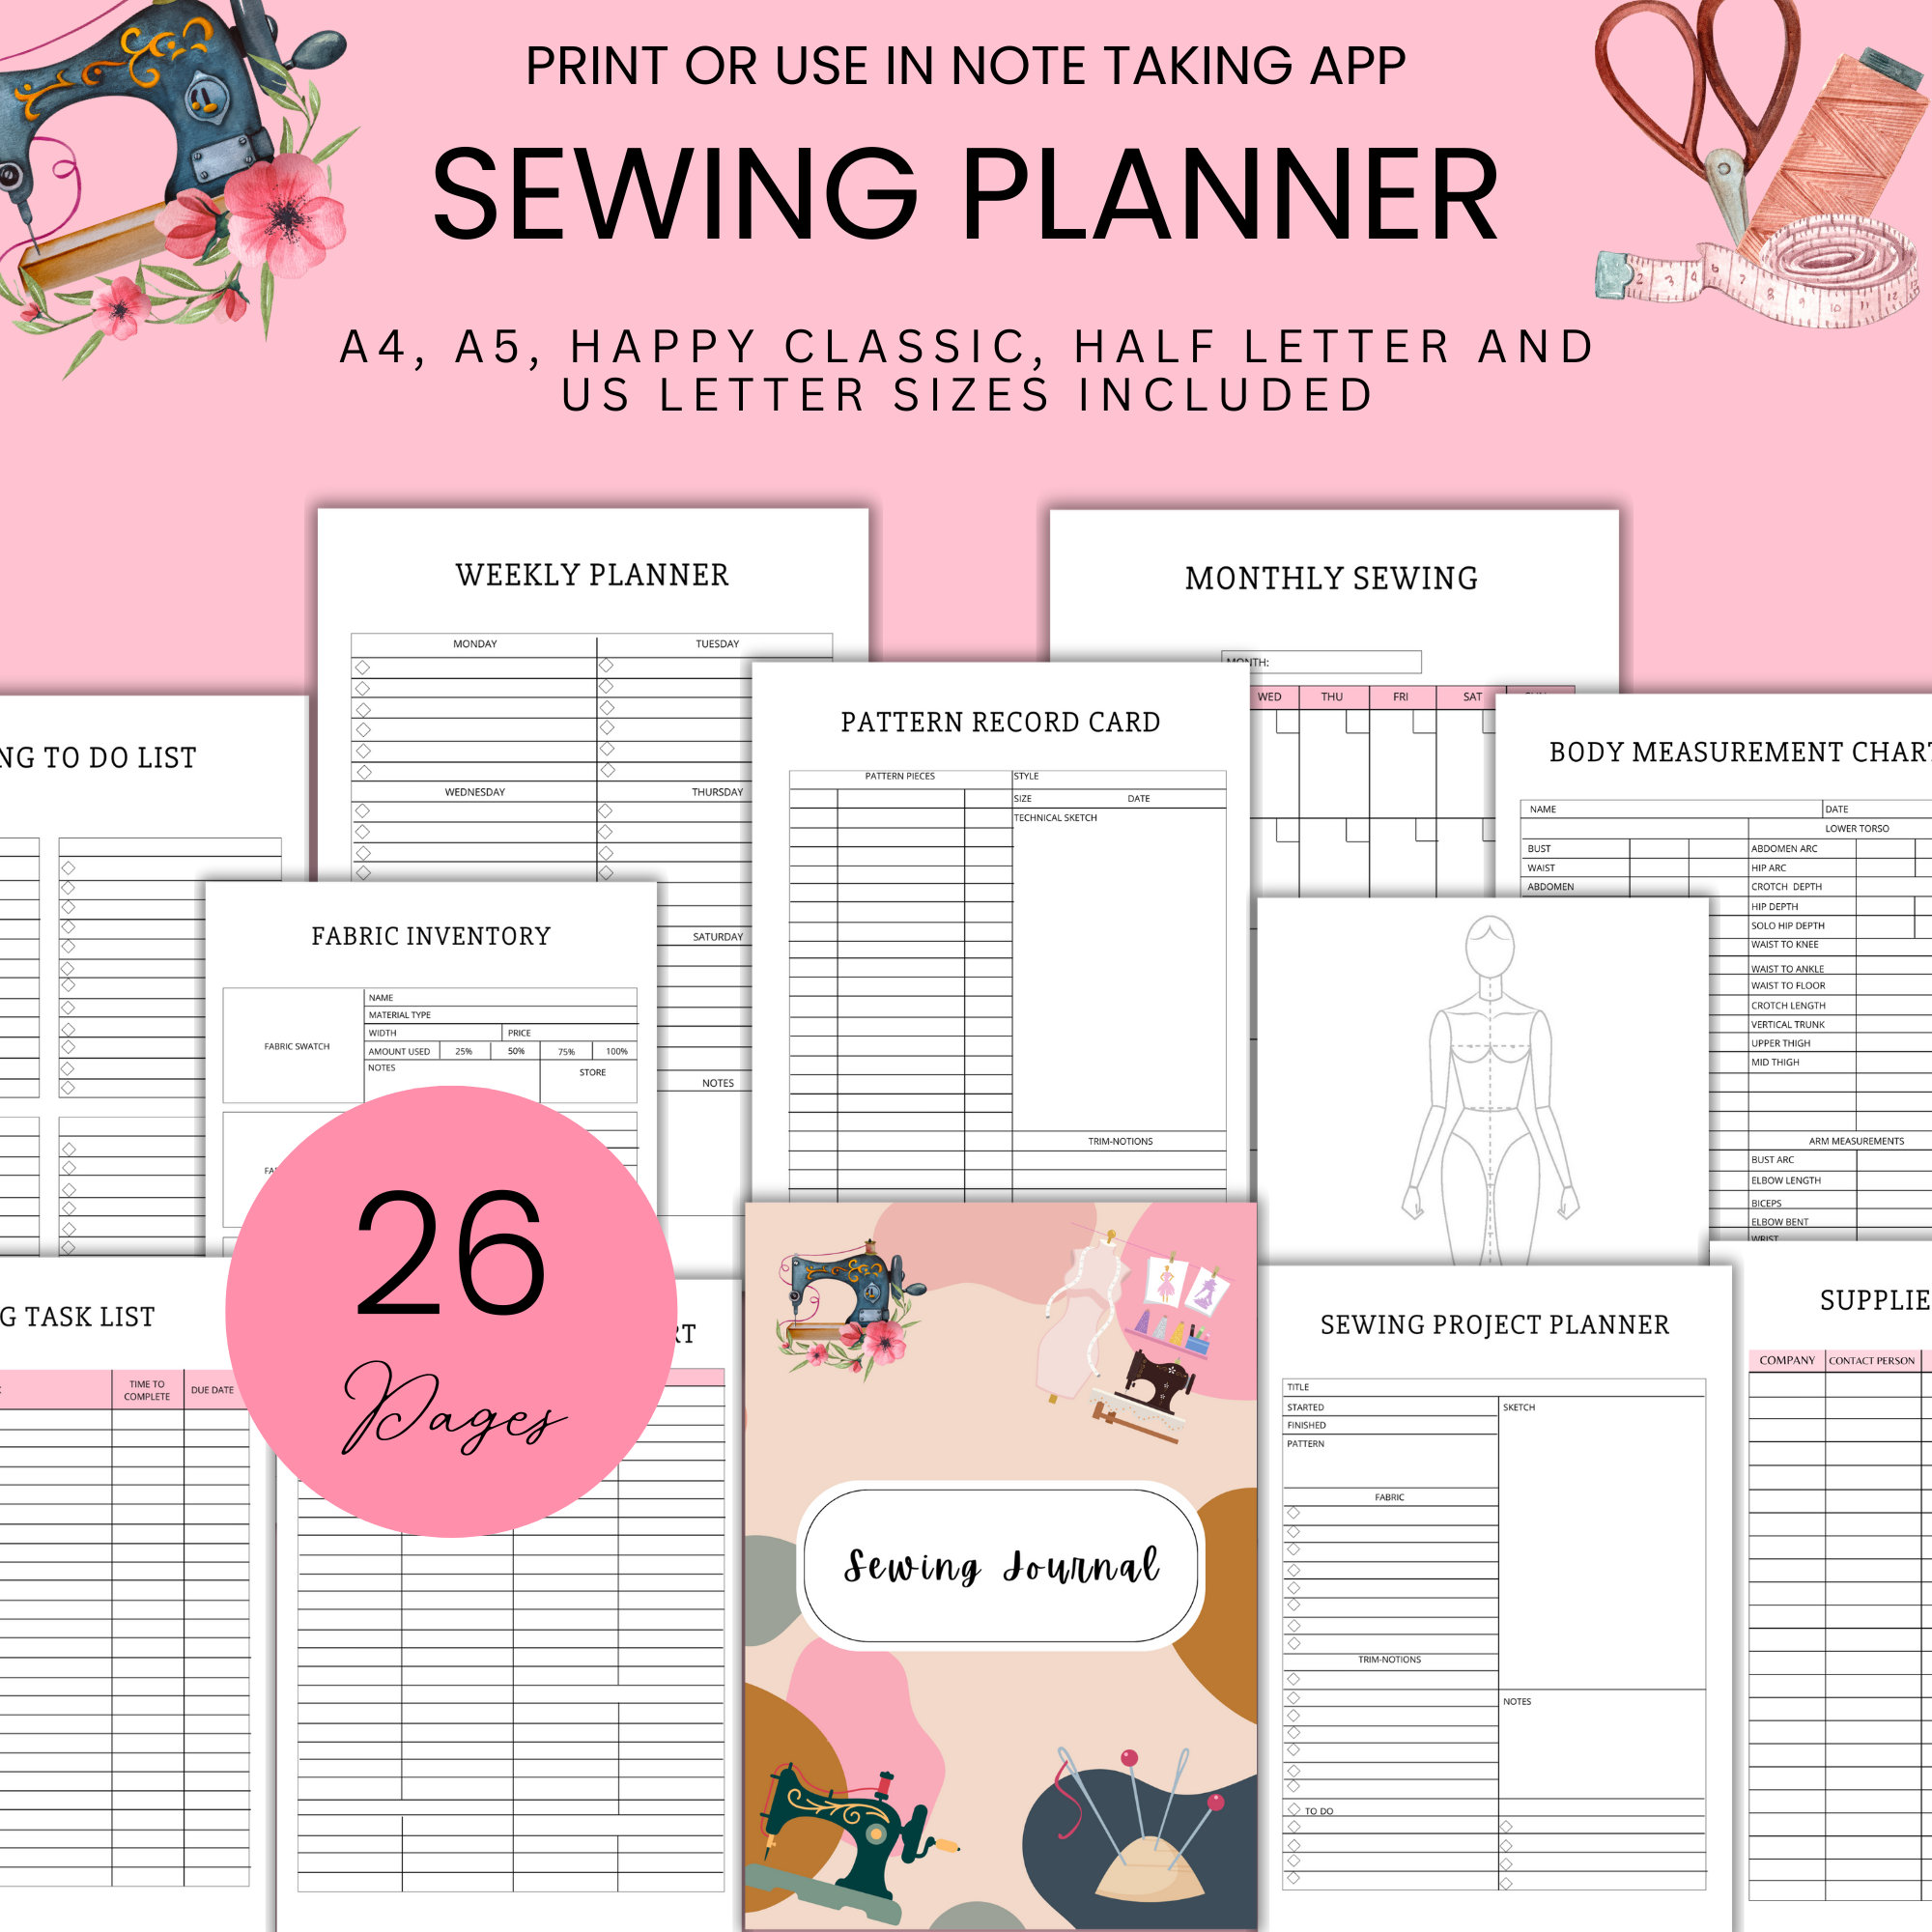 Sewing planner for Men's garments